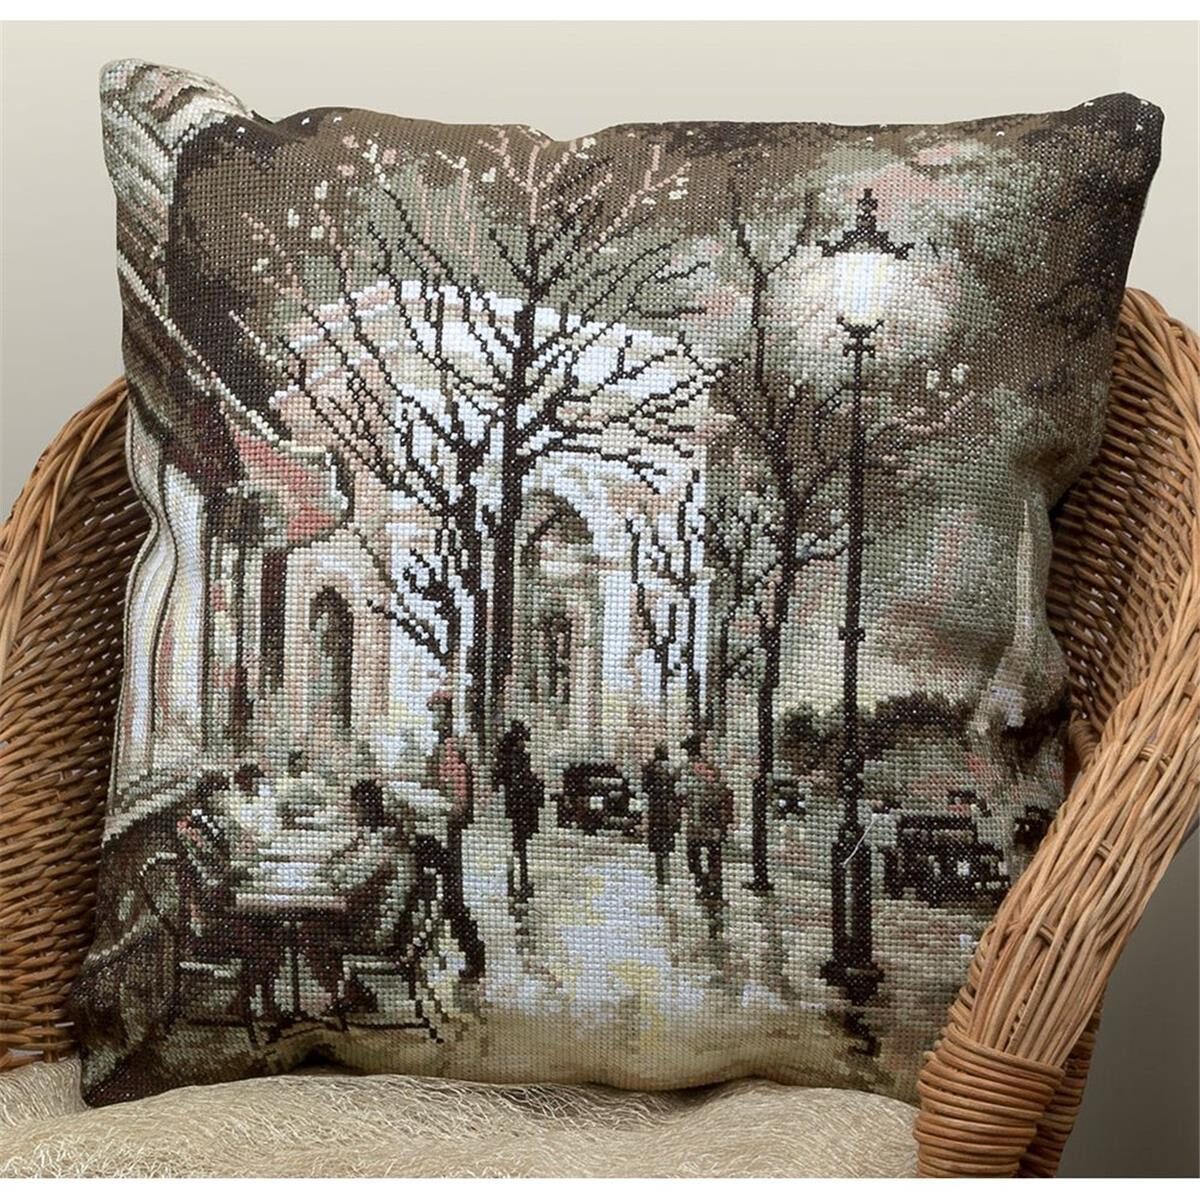 Panna counted cross stitch kit cushion "Nocturnal...